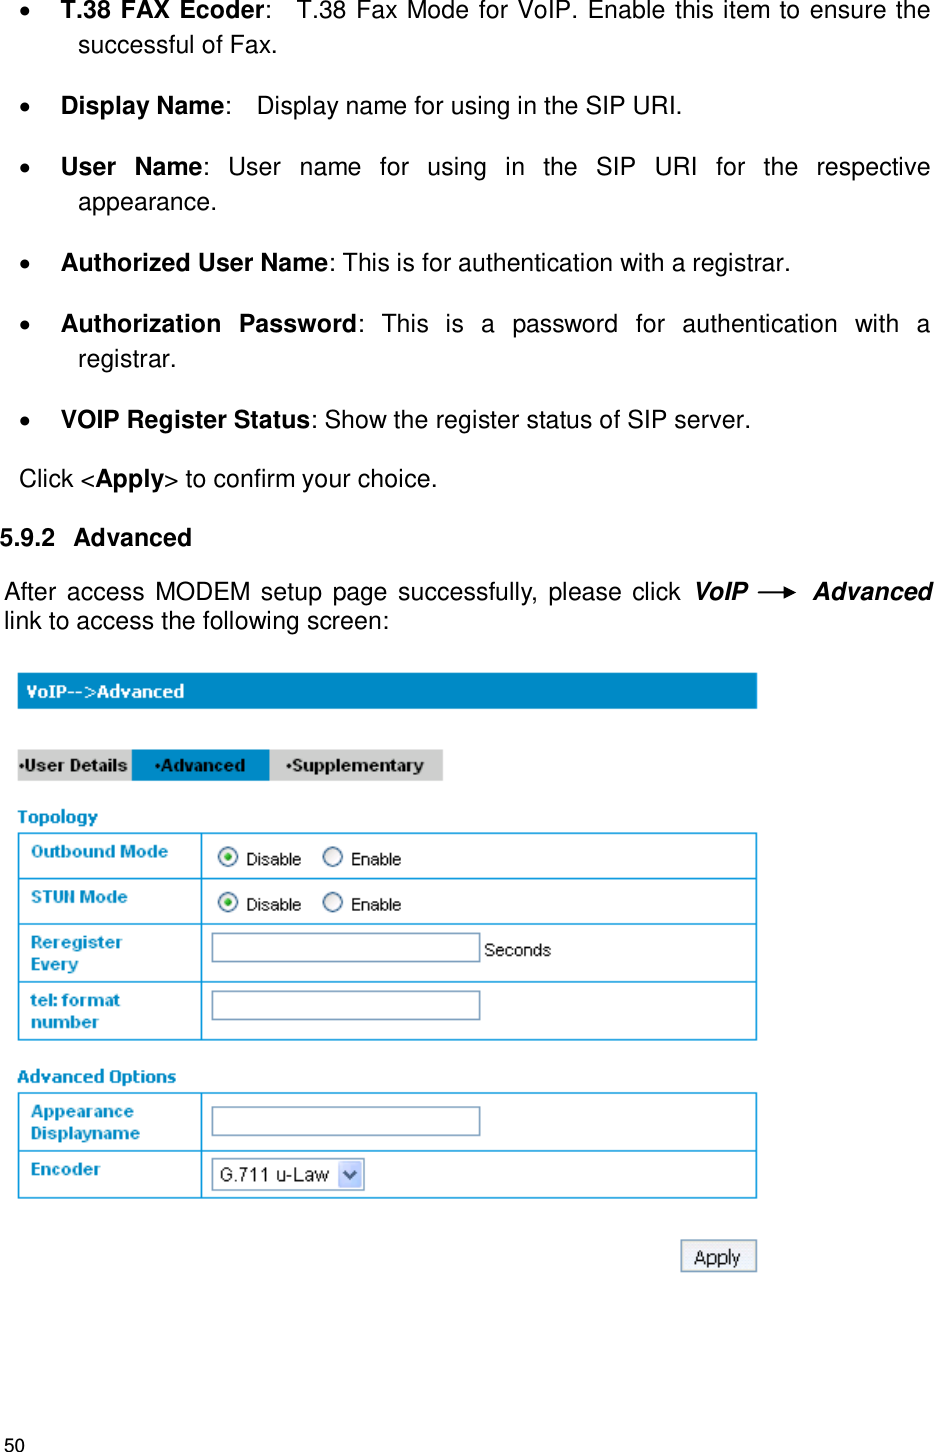 50  T.38 FAX Ecoder:    T.38 Fax Mode for VoIP. Enable this item to ensure the successful of Fax.    Display Name:    Display name for using in the SIP URI.  User  Name:  User  name  for  using  in  the  SIP  URI  for  the  respective appearance.  Authorized User Name: This is for authentication with a registrar.    Authorization  Password:  This  is  a  password  for  authentication  with  a registrar.  VOIP Register Status: Show the register status of SIP server. Click &lt;Apply&gt; to confirm your choice. 5.9.2   Advanced After access MODEM setup  page successfully, please click  VoIP    Advanced link to access the following screen:  